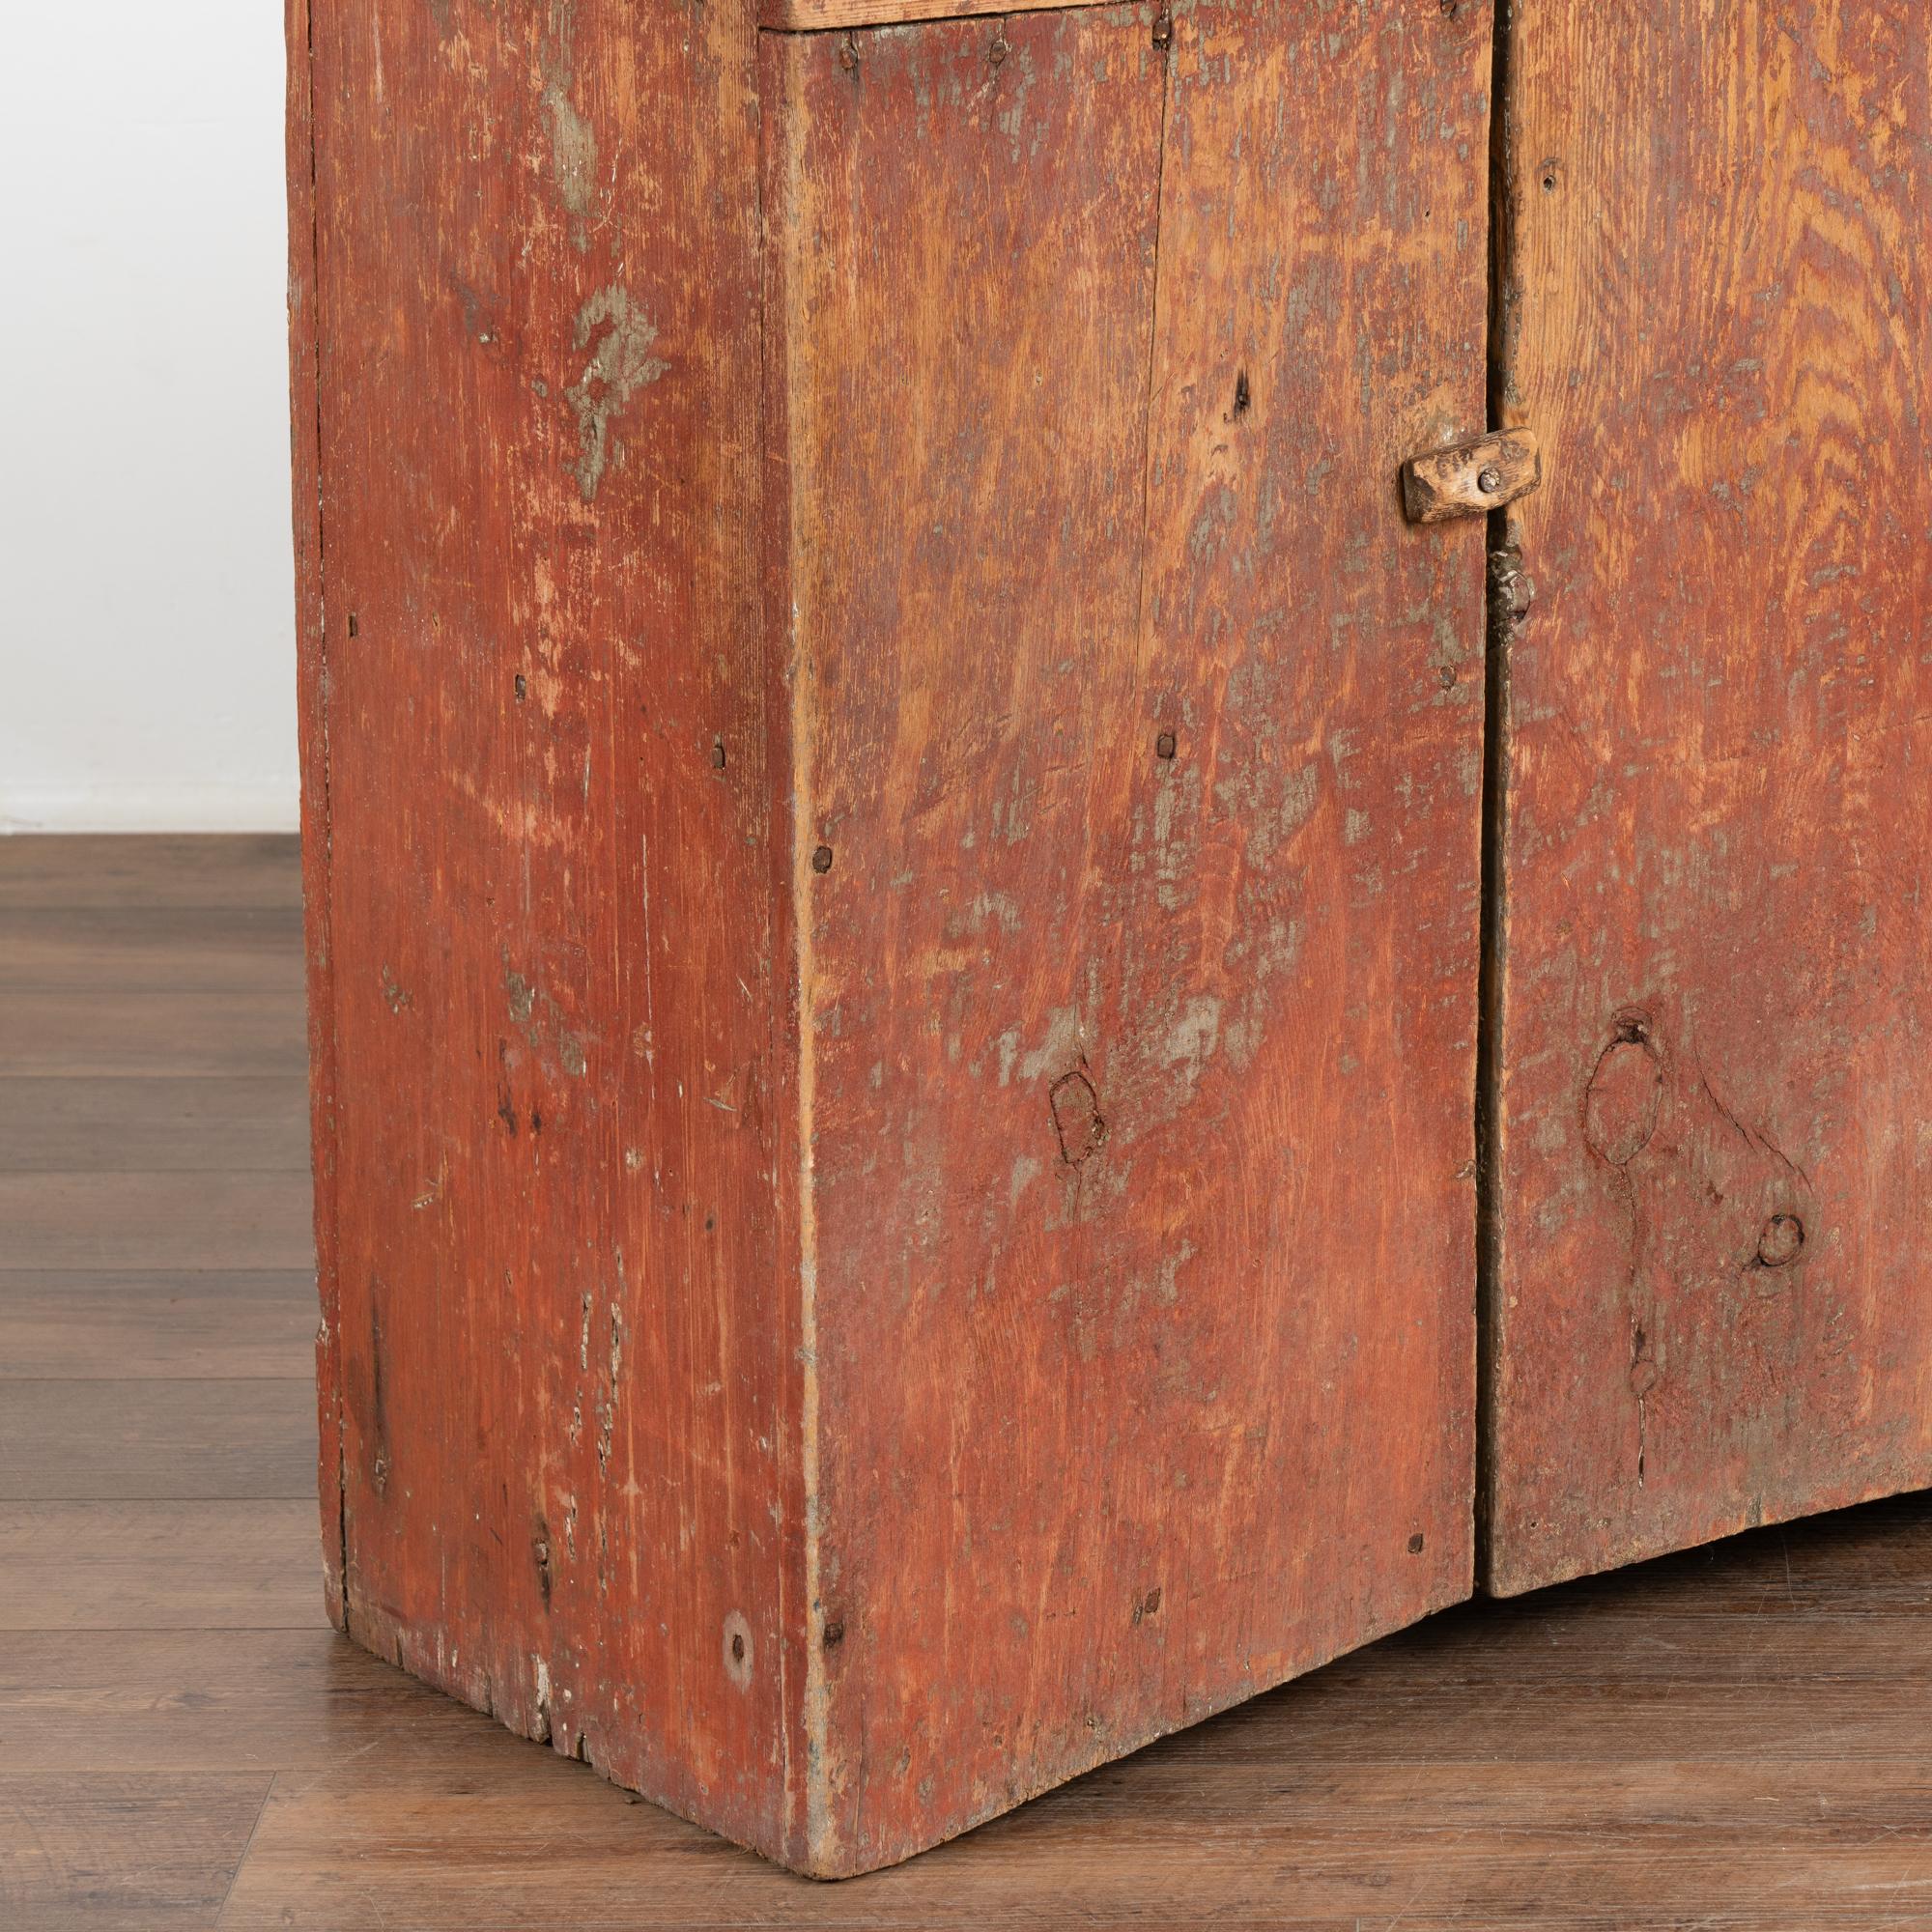 Original Red Painted Rustic Narrow Pine Cabinet, Sweden circa 1840-60 For Sale 3